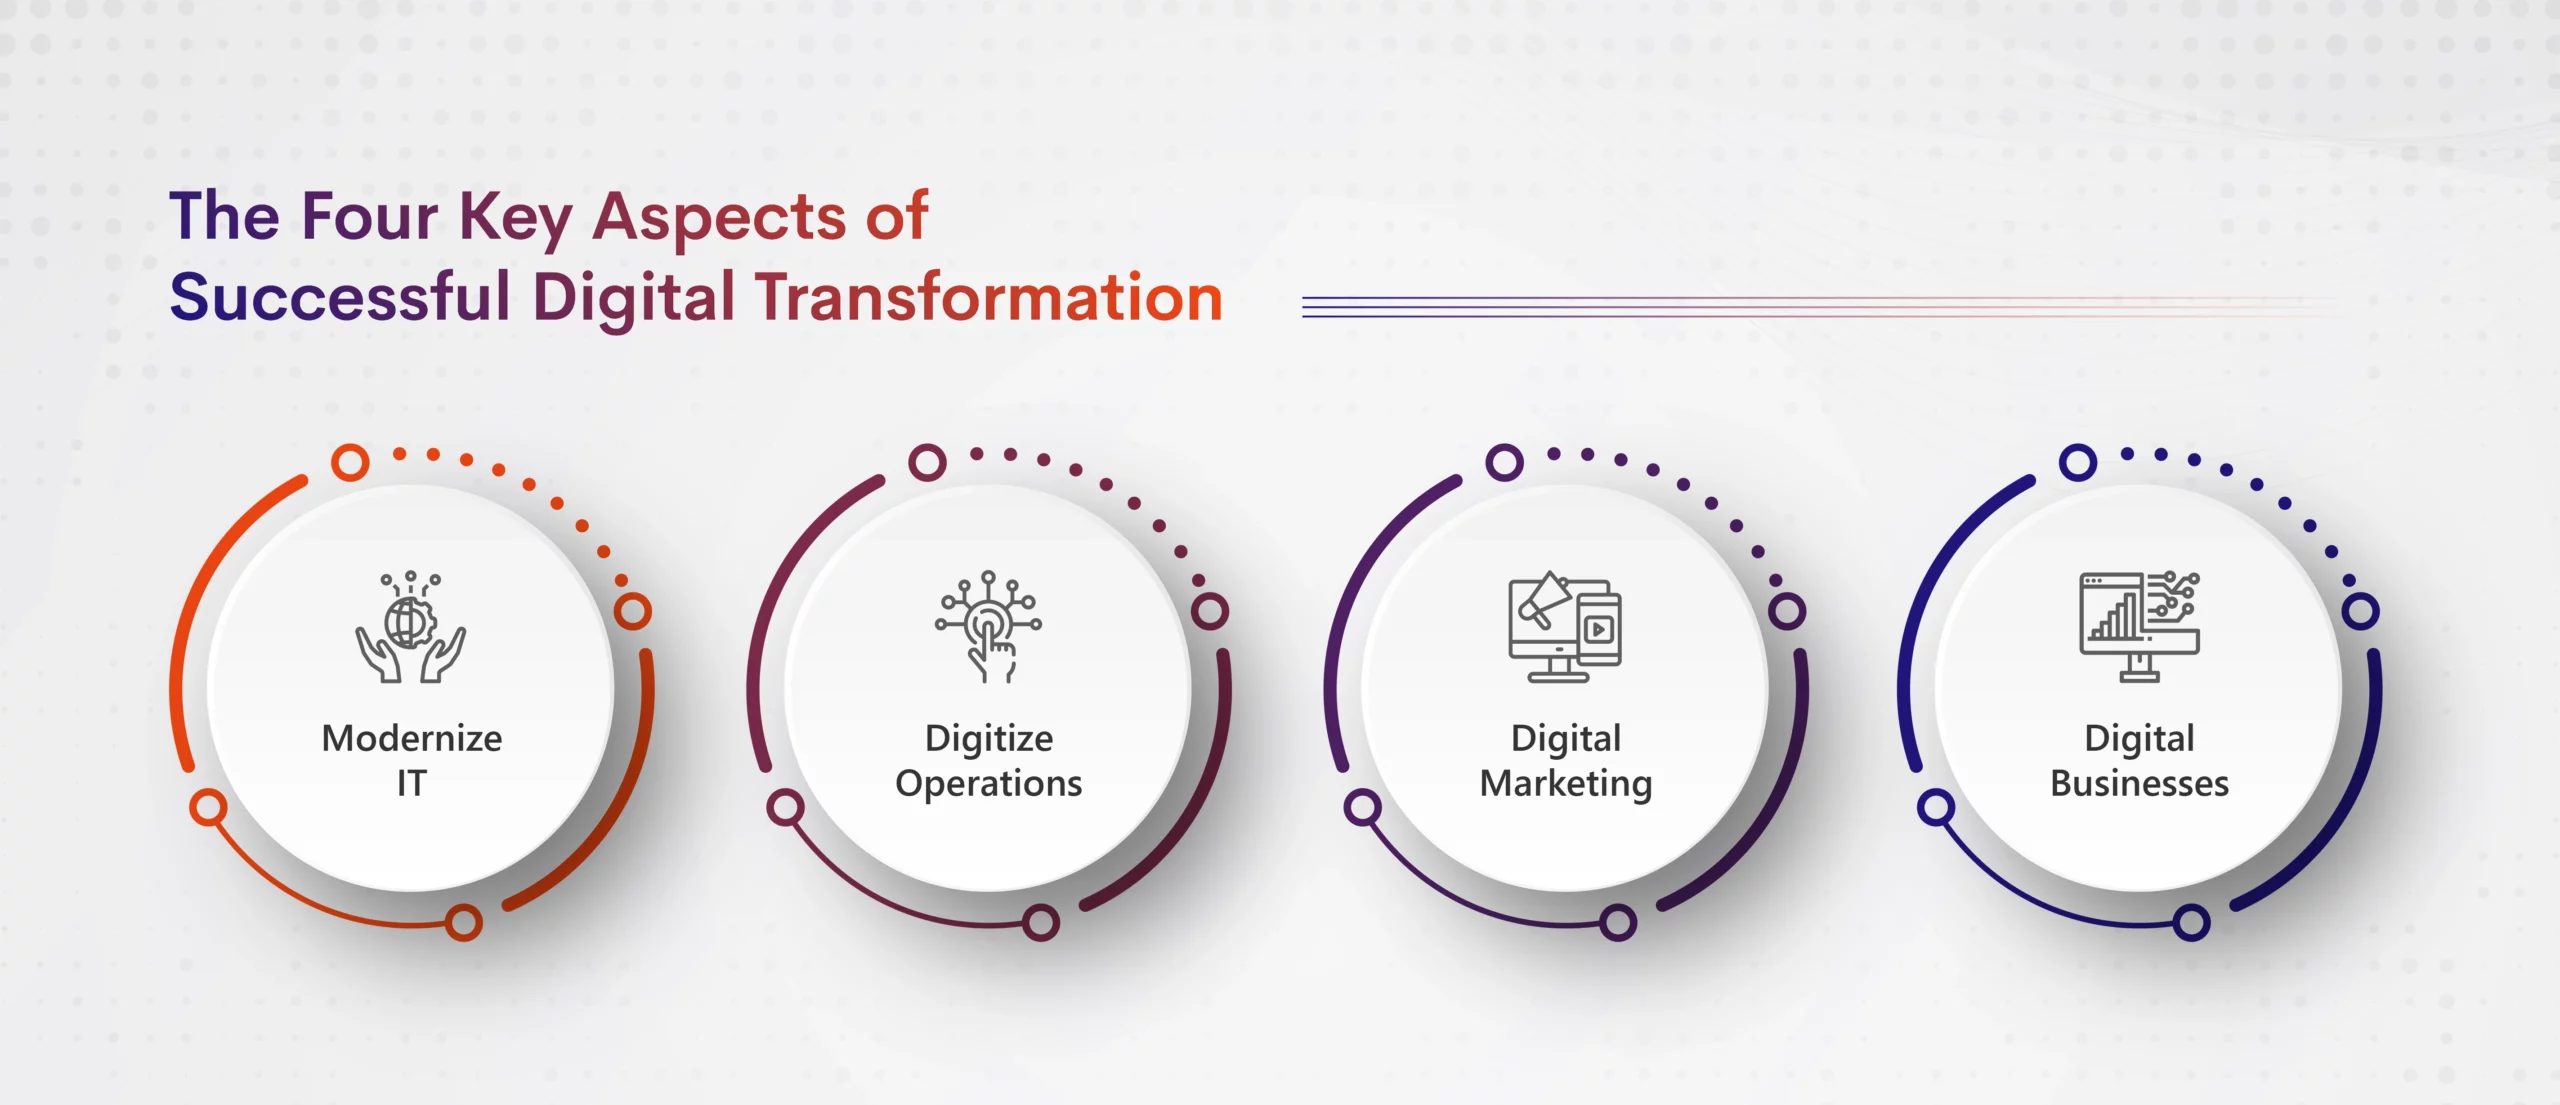 The Four Aspects of Digital Transformation